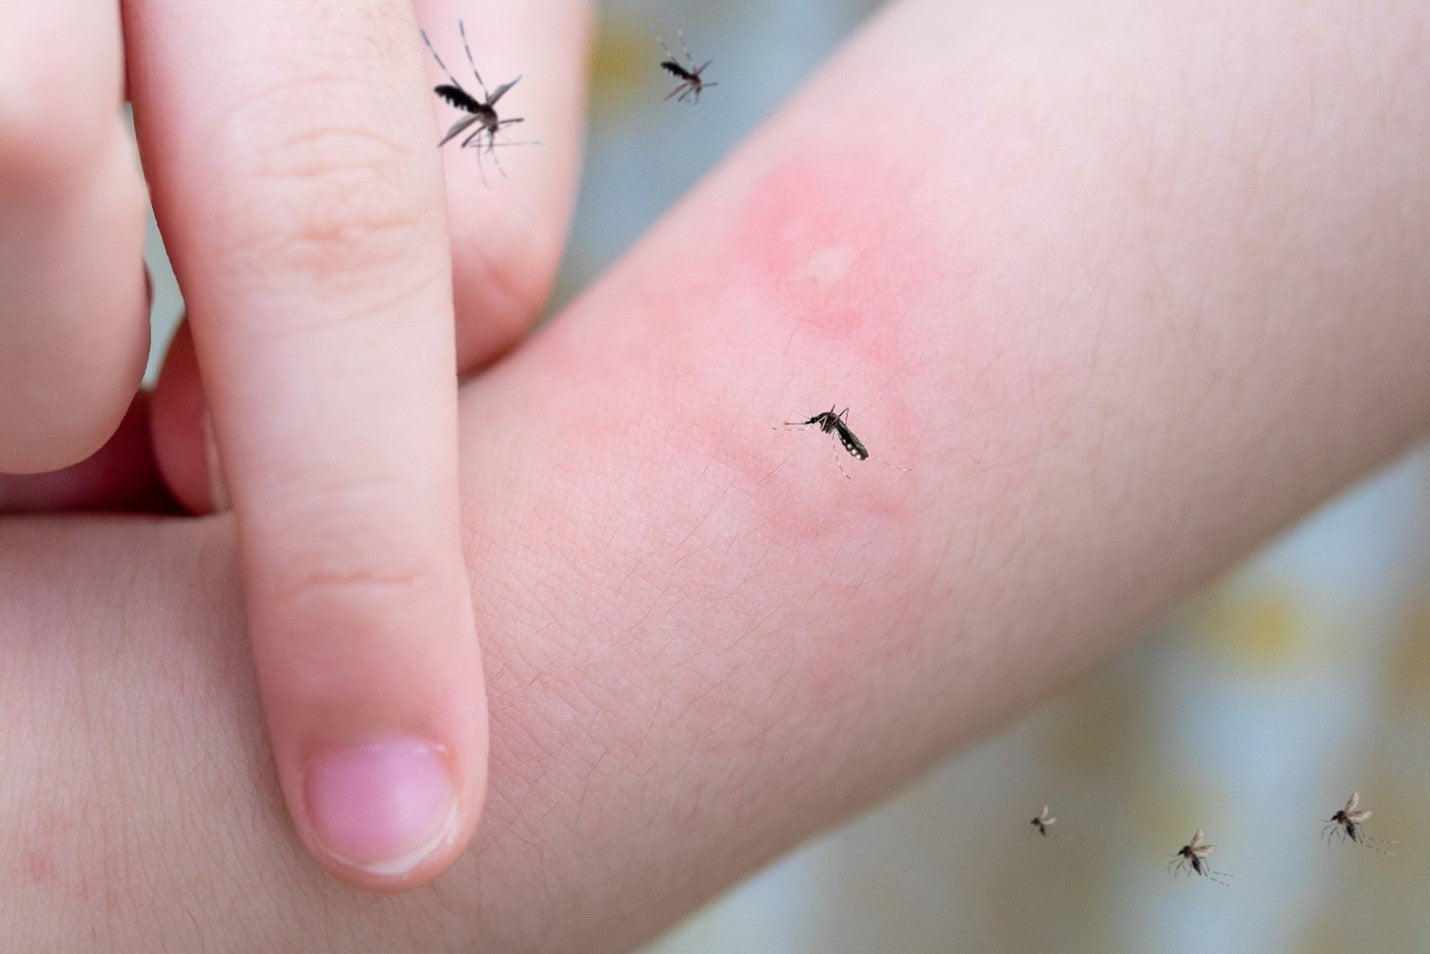 How to Care for Bug and Insect Bites